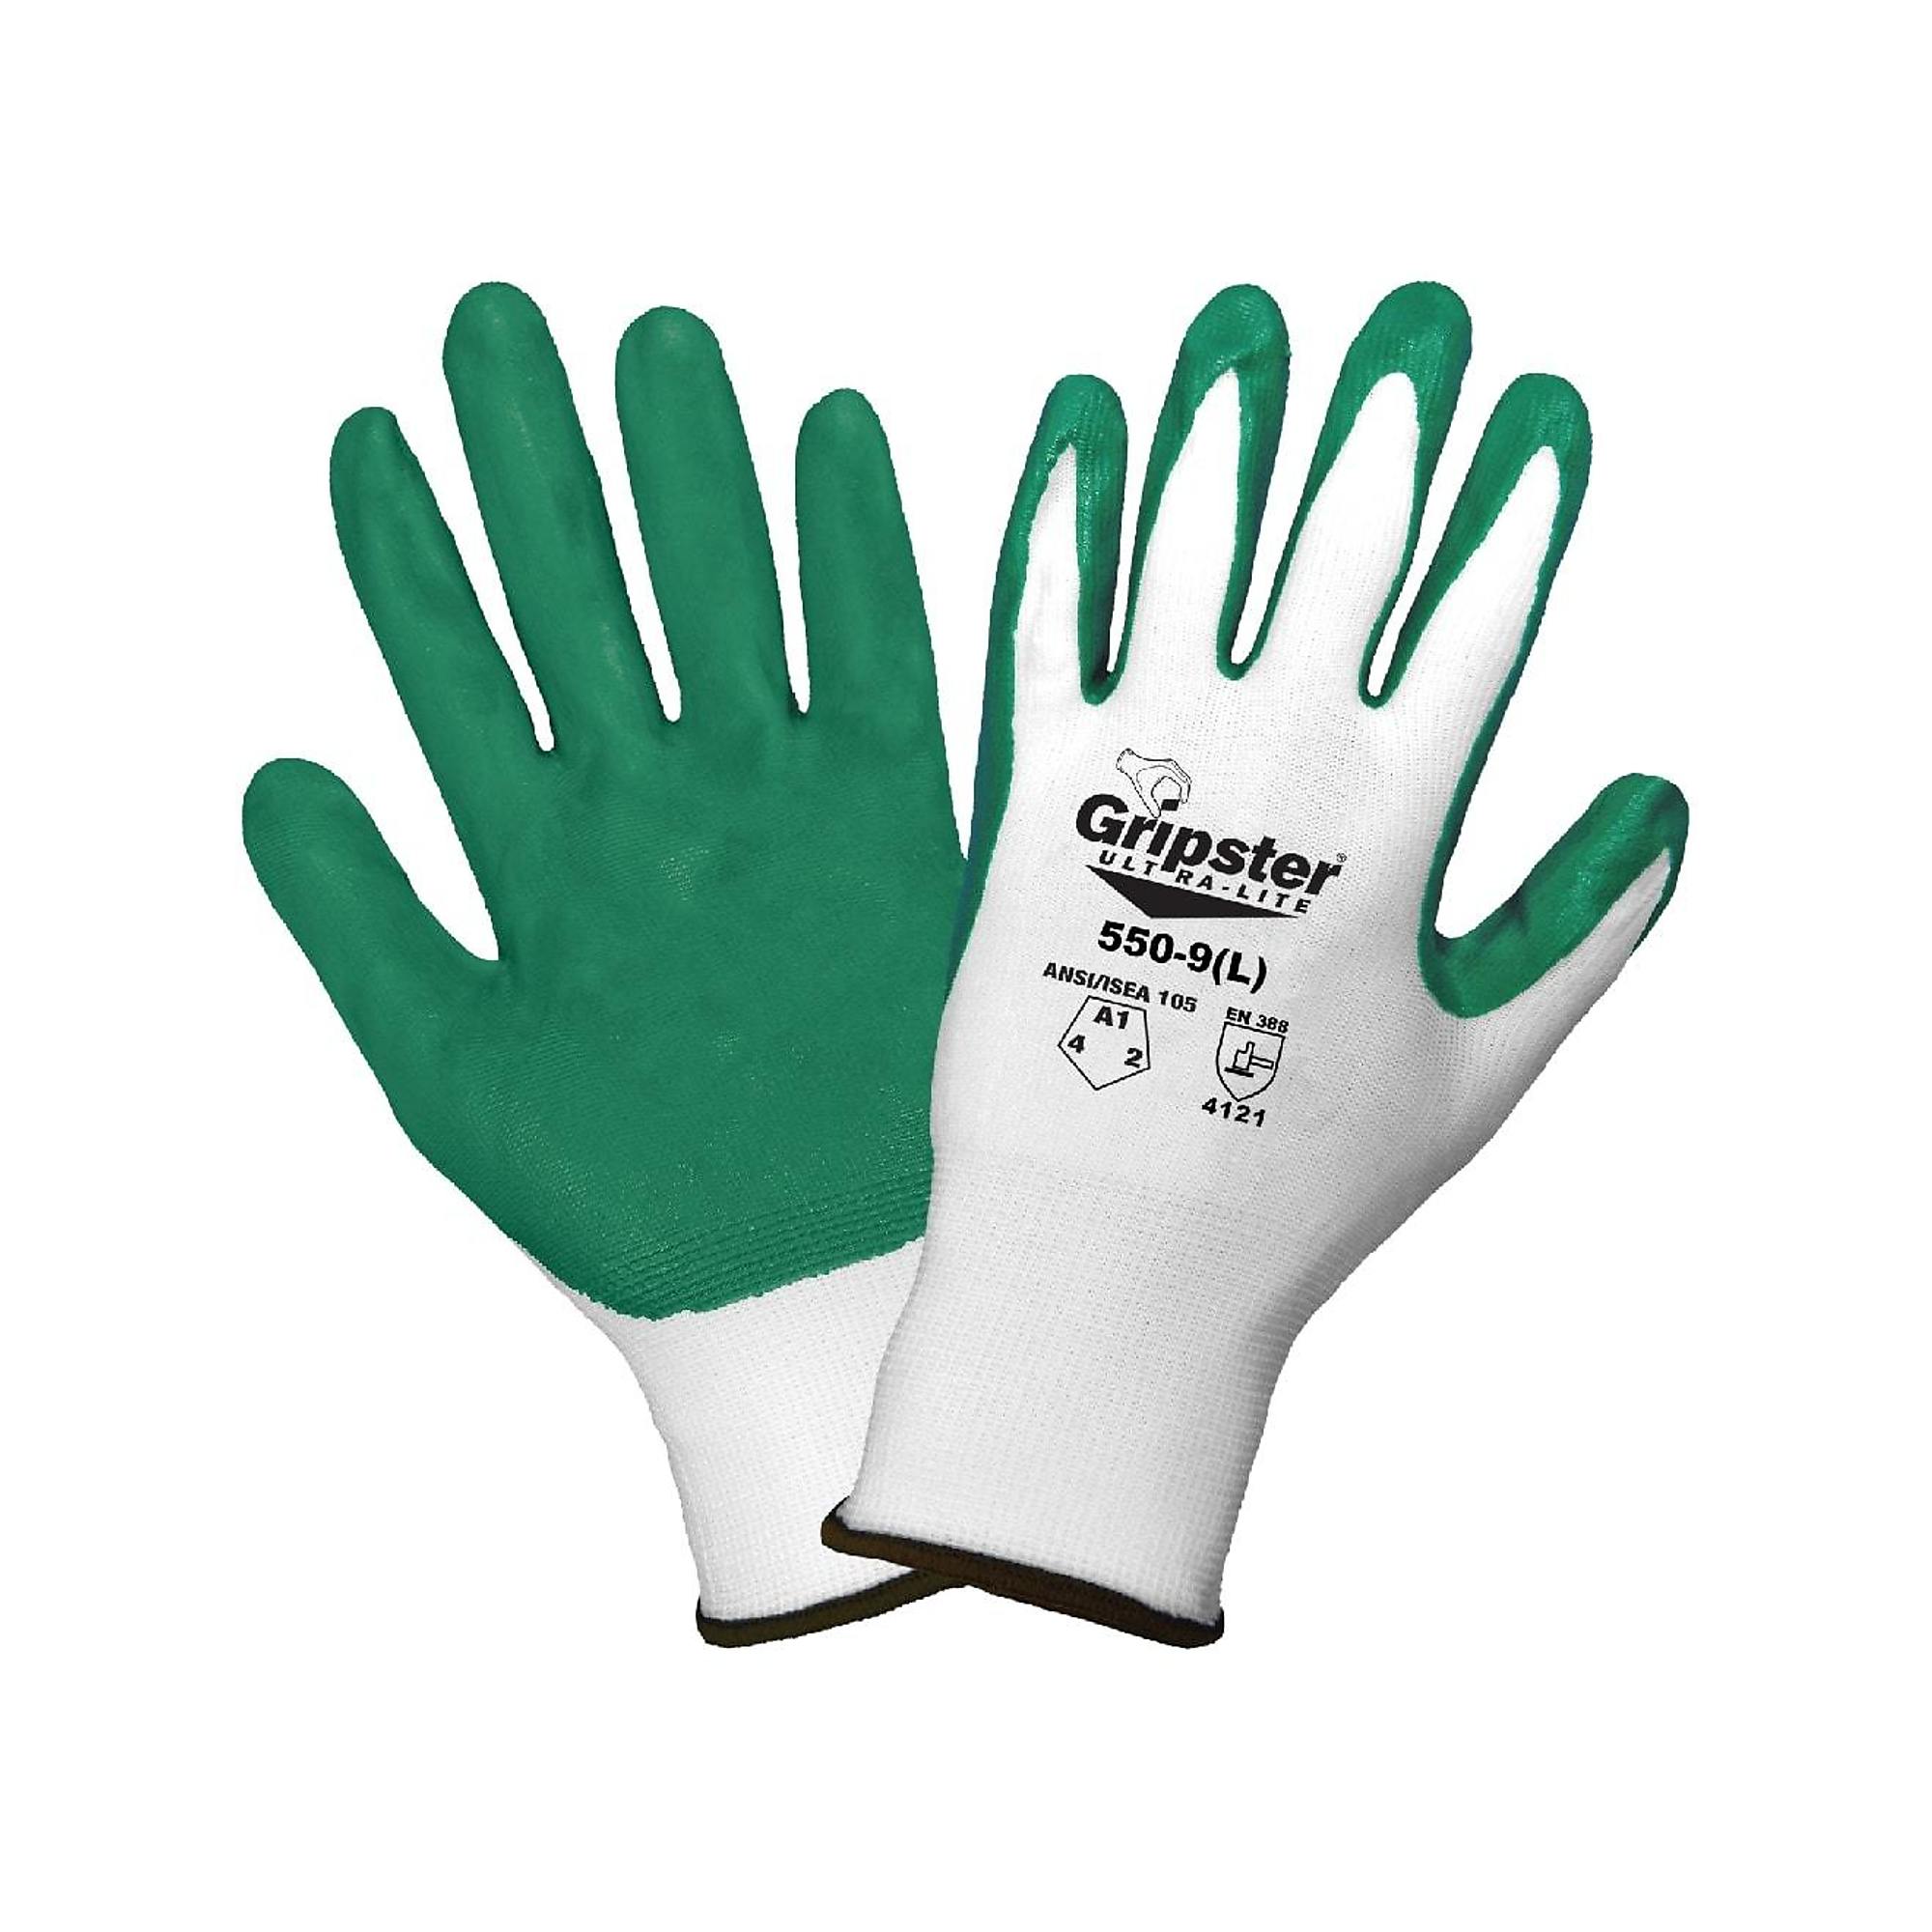 Global Glove Gripster , Solid Nitrile Coated Nylon Gloves - 12 Pairs, Size L, Color White/Green, Included (qty.) 12 Model 550-9(L)